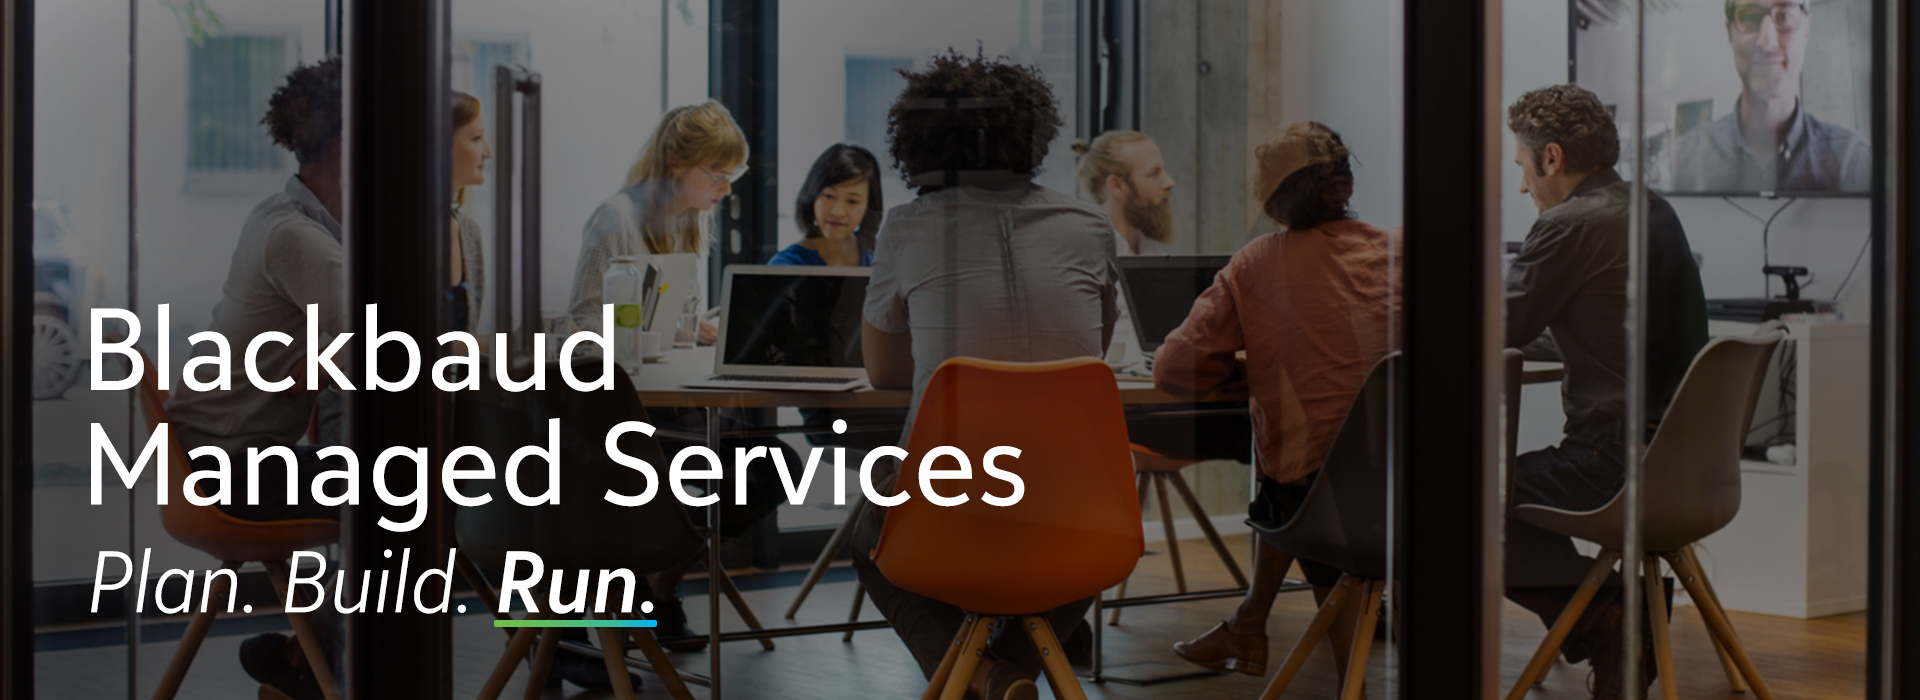 Blackbaud Managed Services